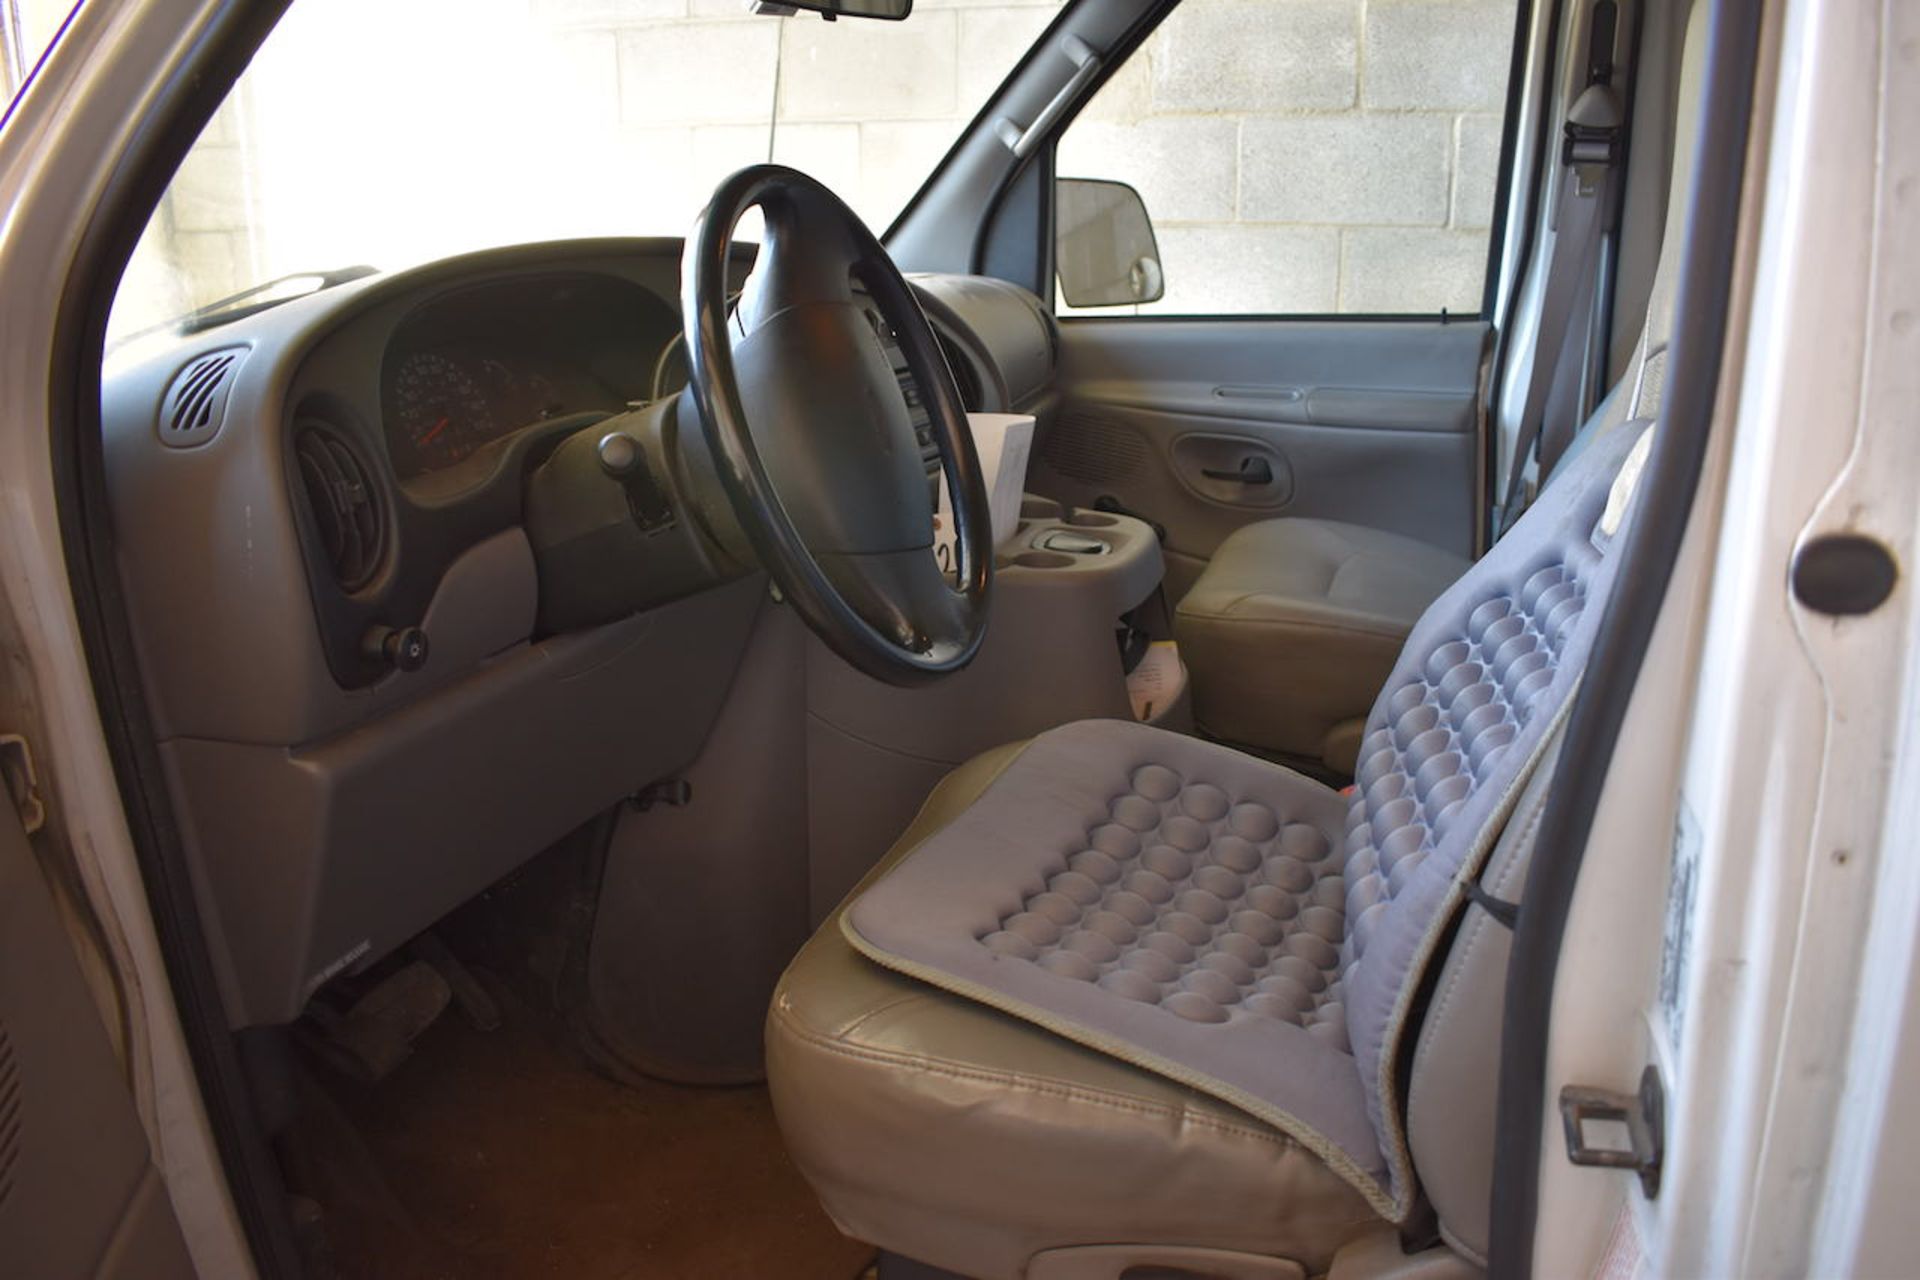 2001 Ford E-350 Cargo Van, VIN 1FTRE14201HB52213, 107,921 miles indicated, A/C, AM/FM Radio, Roll-up - Image 5 of 12